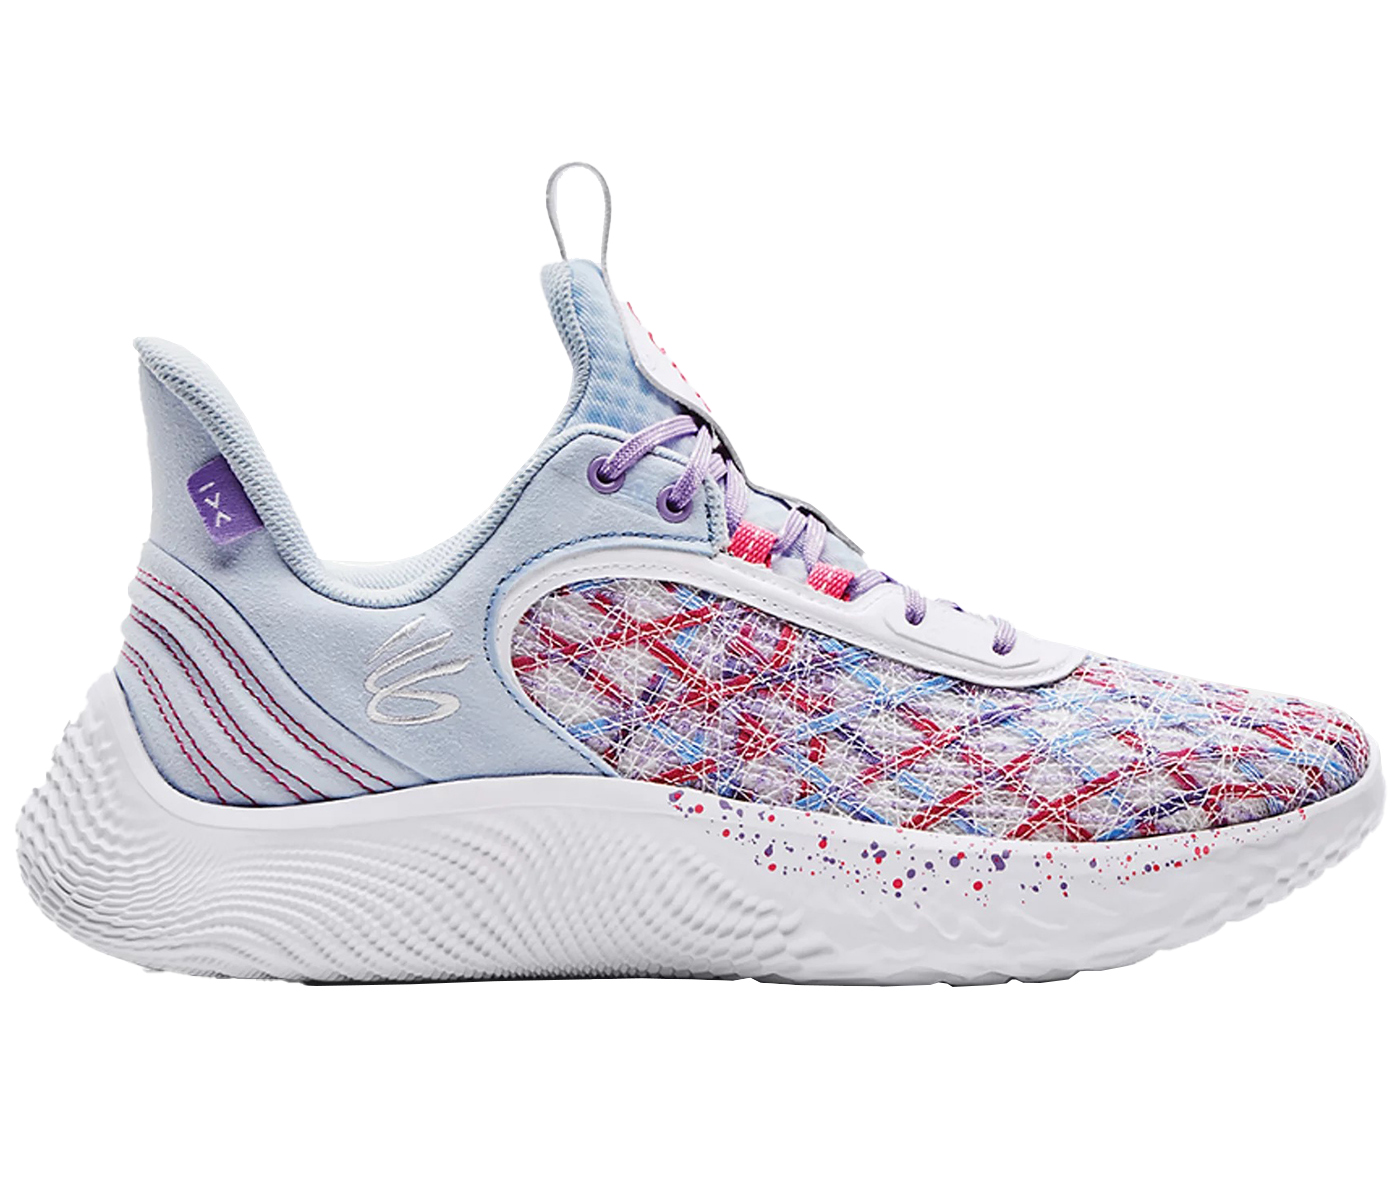 Under Armour Curry Flow 9 For the W (GS) Kids' - 3025731-401 - US